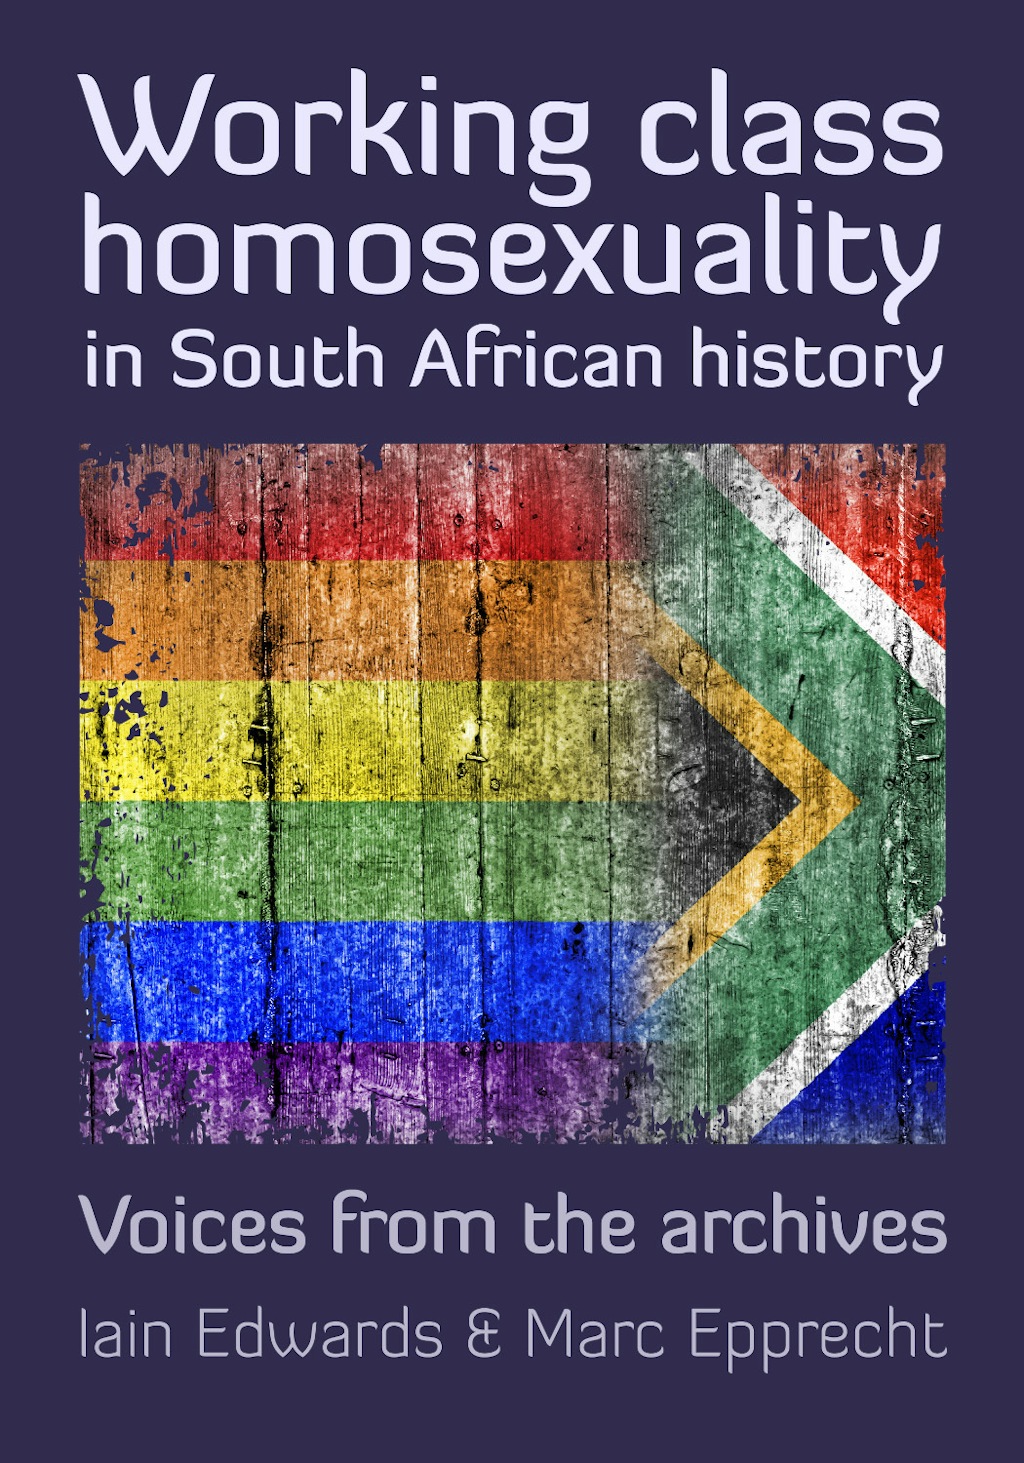 Working Class Homosexuality In South African History 5 Inch 2020 02 28 01